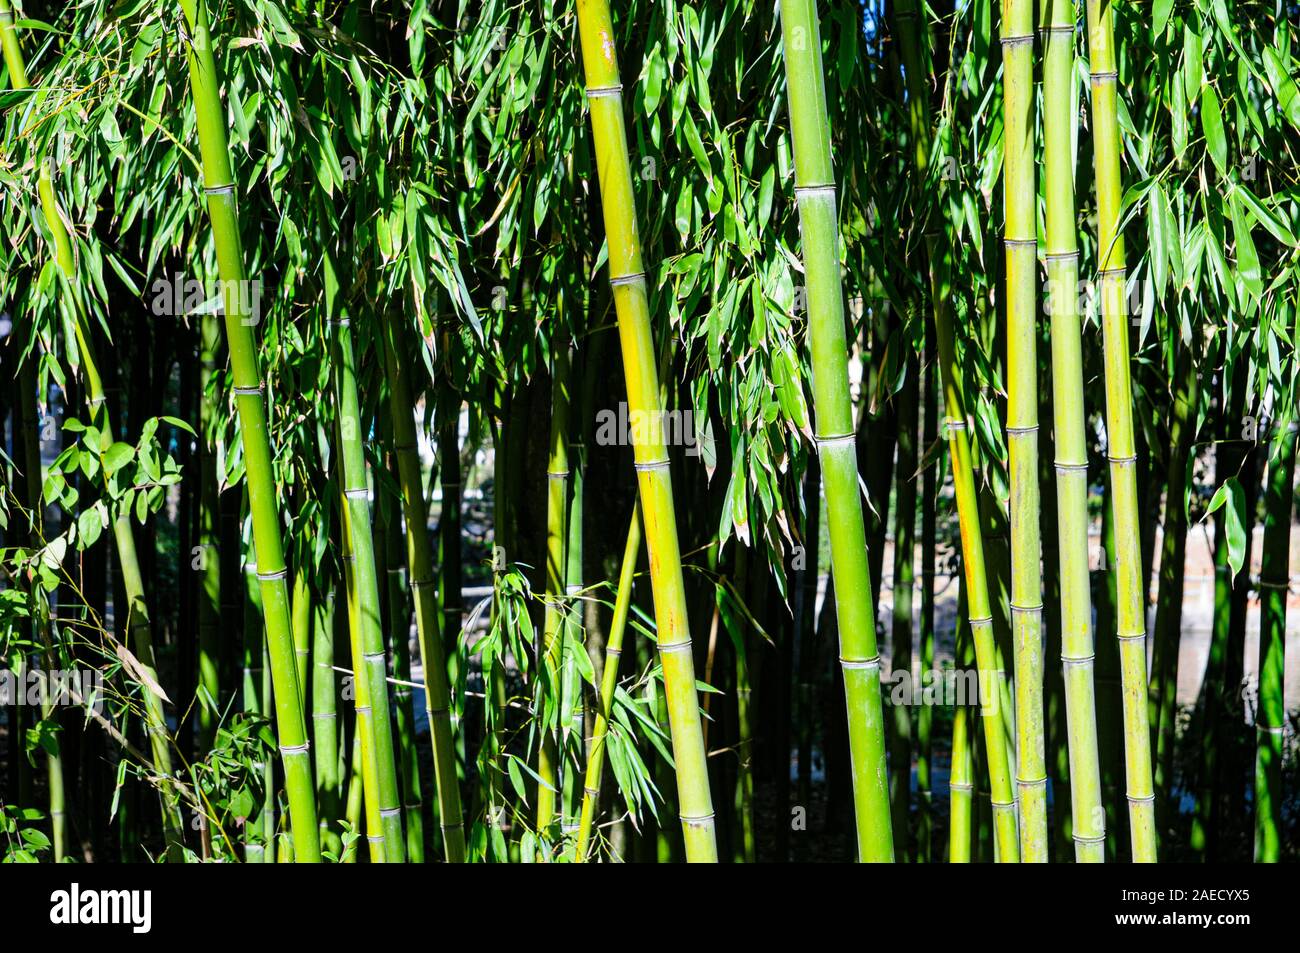 Close up of Bamboo plants in a grove. Photographed  at Aveiro city park, Aveiro, Portugal Stock Photo